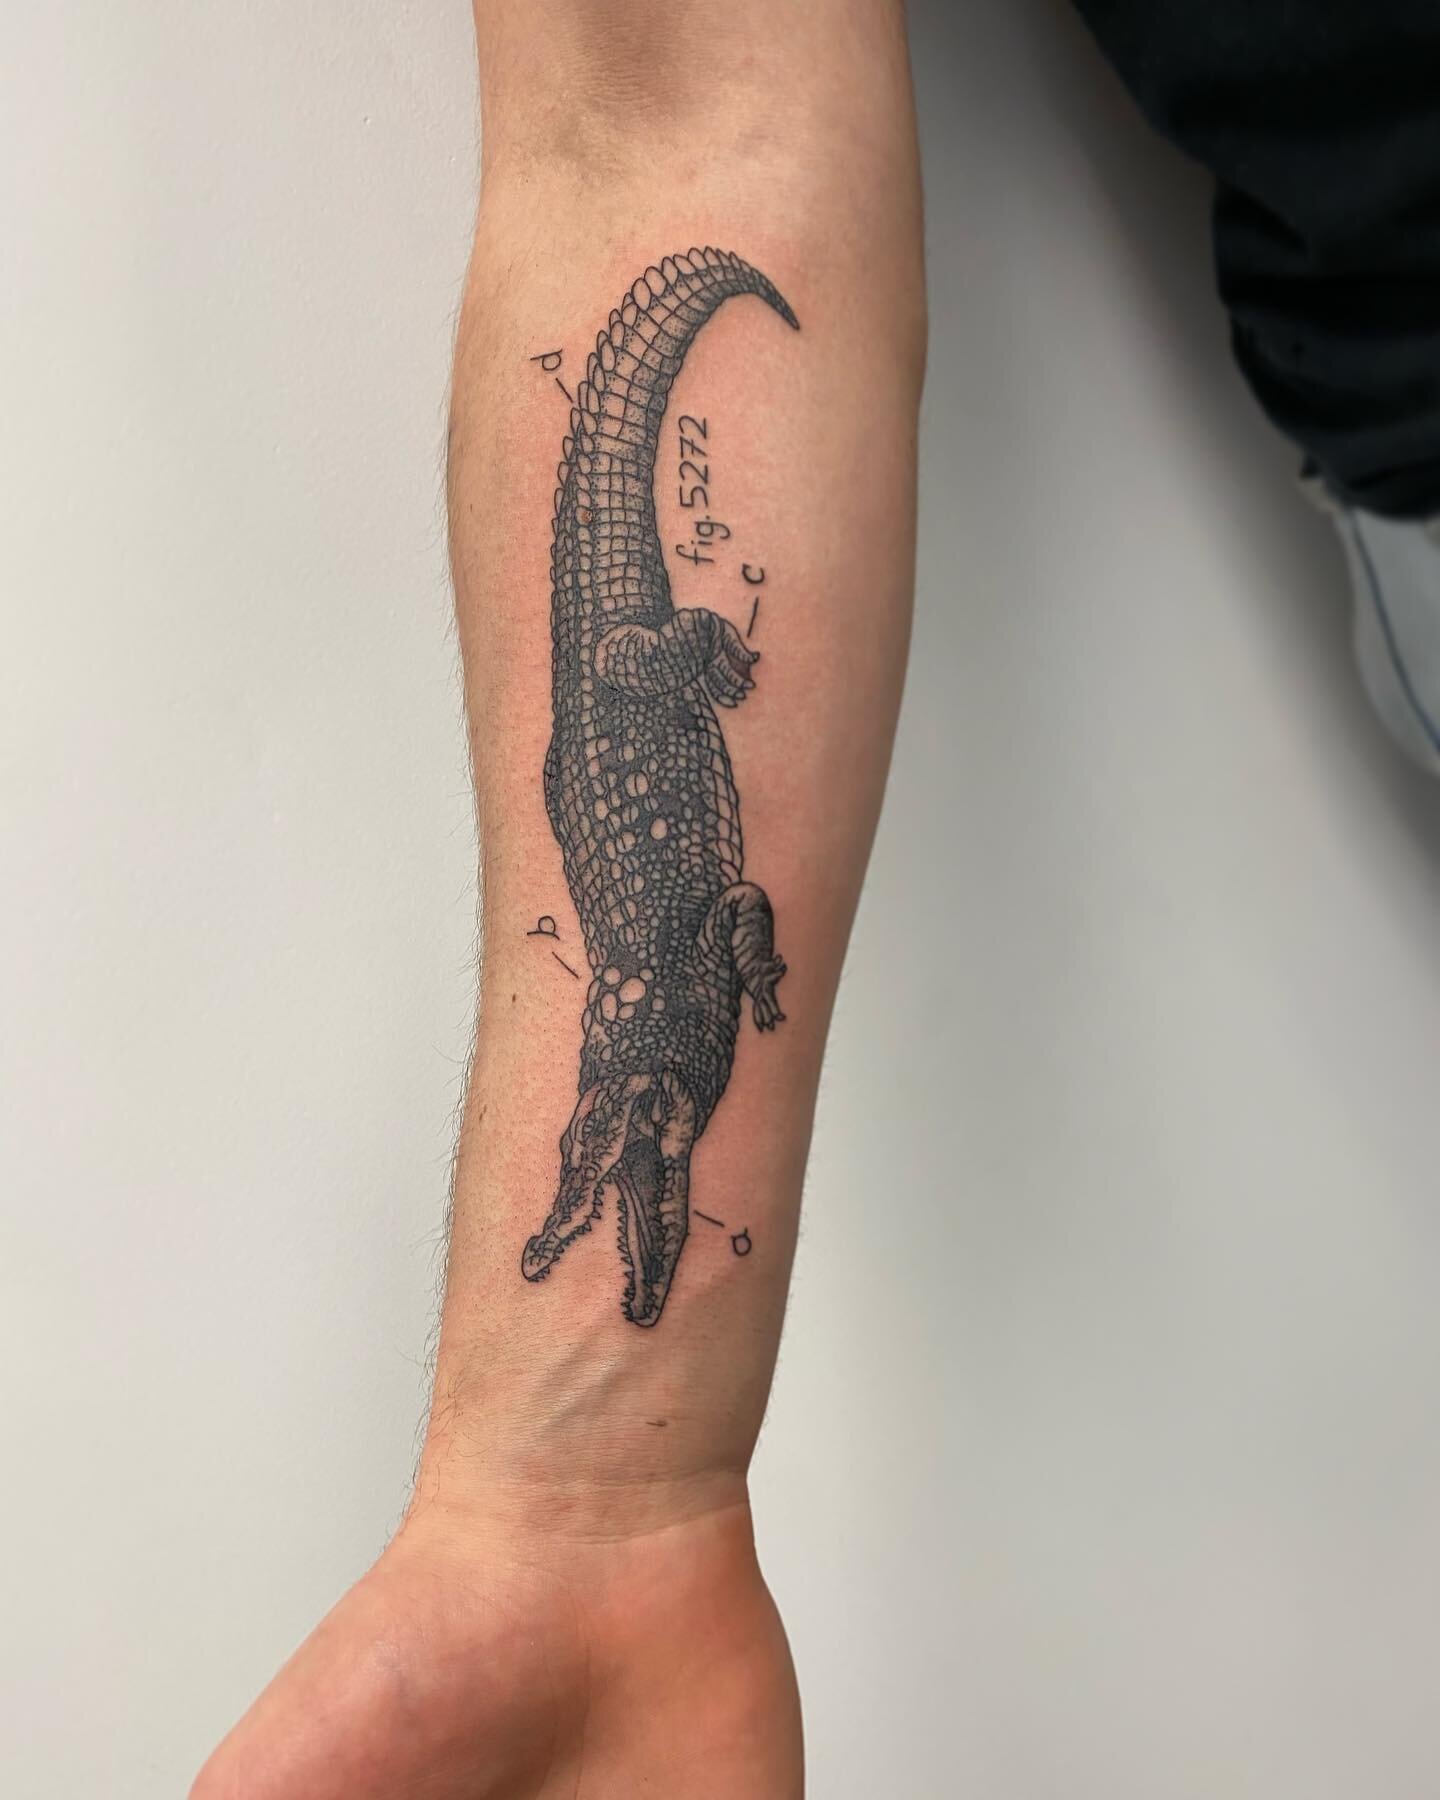 See you in a while crocodile and catch you later alligator are my kids favorite phrases when parting ways. They definitely learned that from my mom. Anyone else out there still use these phrases regularly? #theedgetattoo #theedgetattooct #southWindso